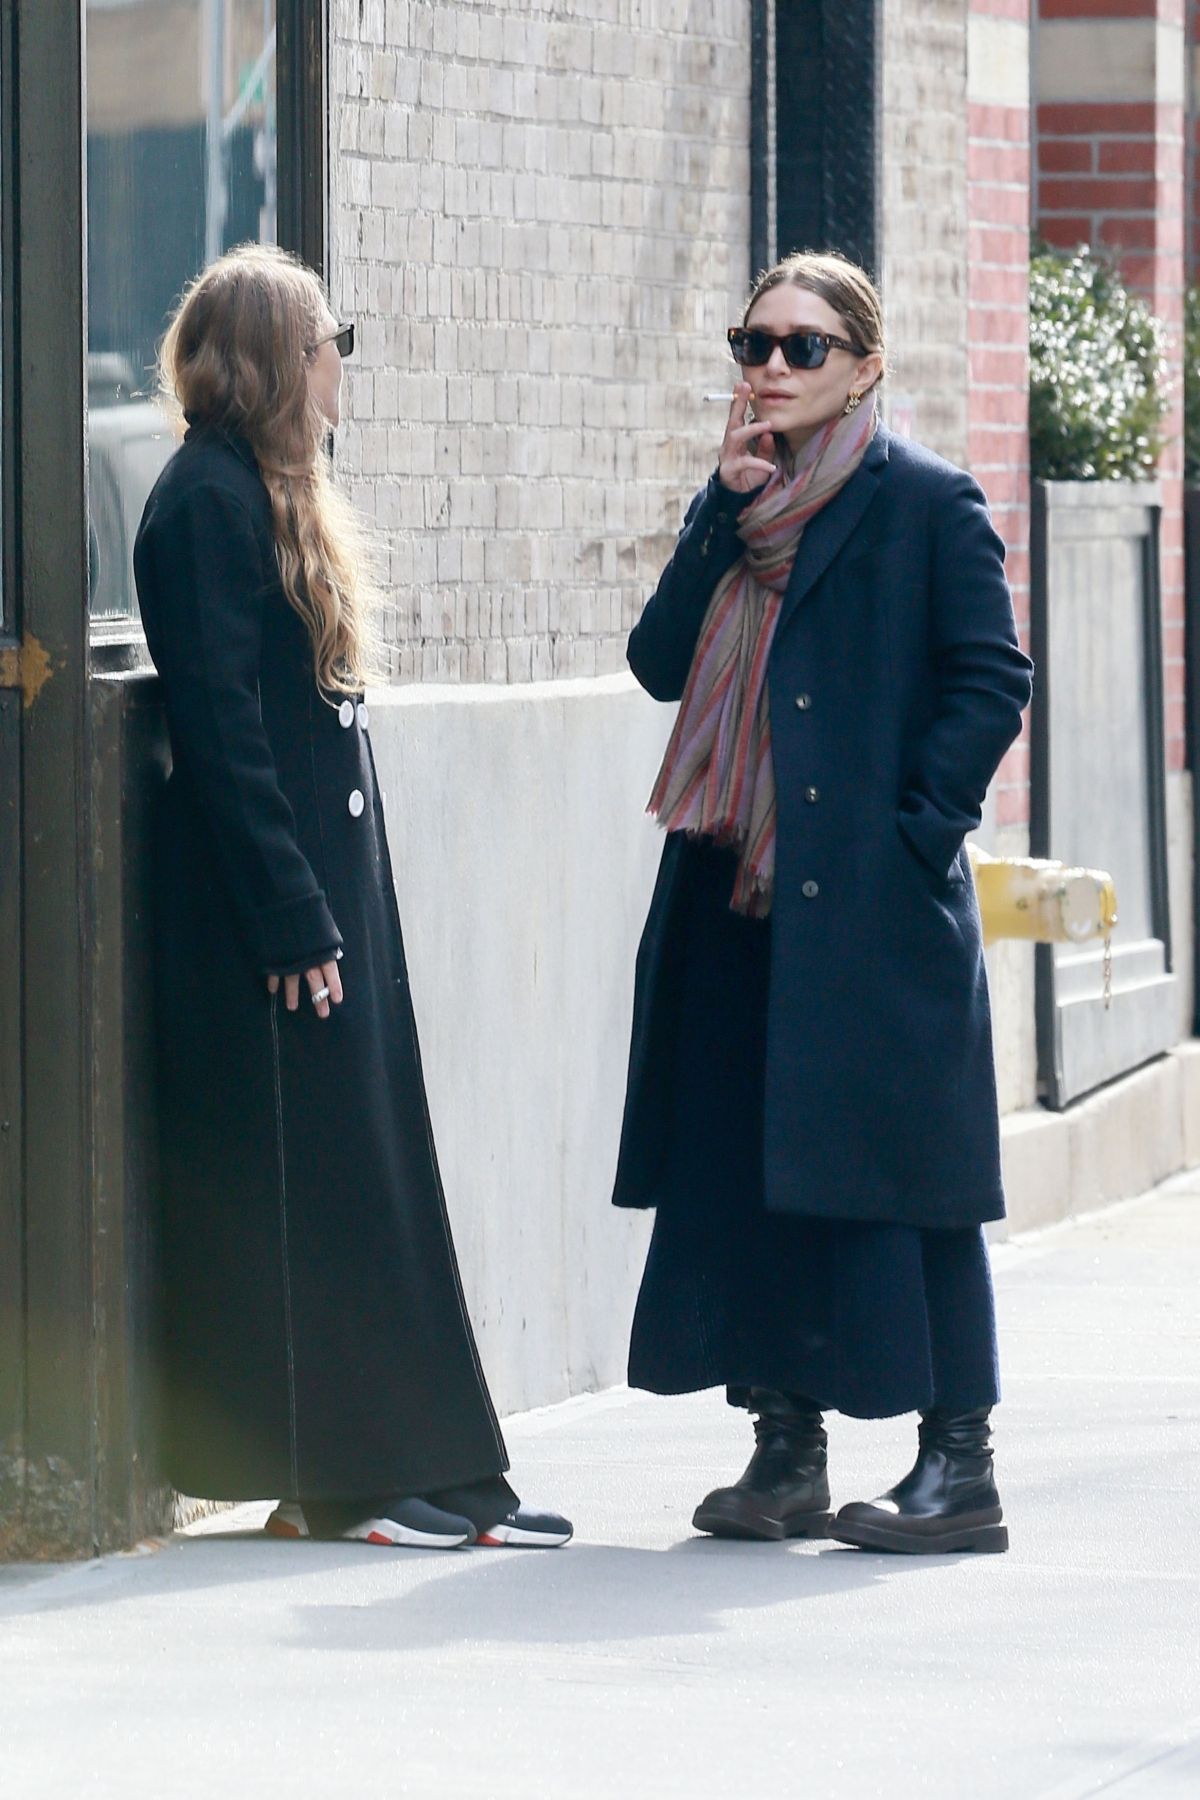 MARY_KATE and ASHLEY OLSEN at Their Office in New York 02/06/2019 ...